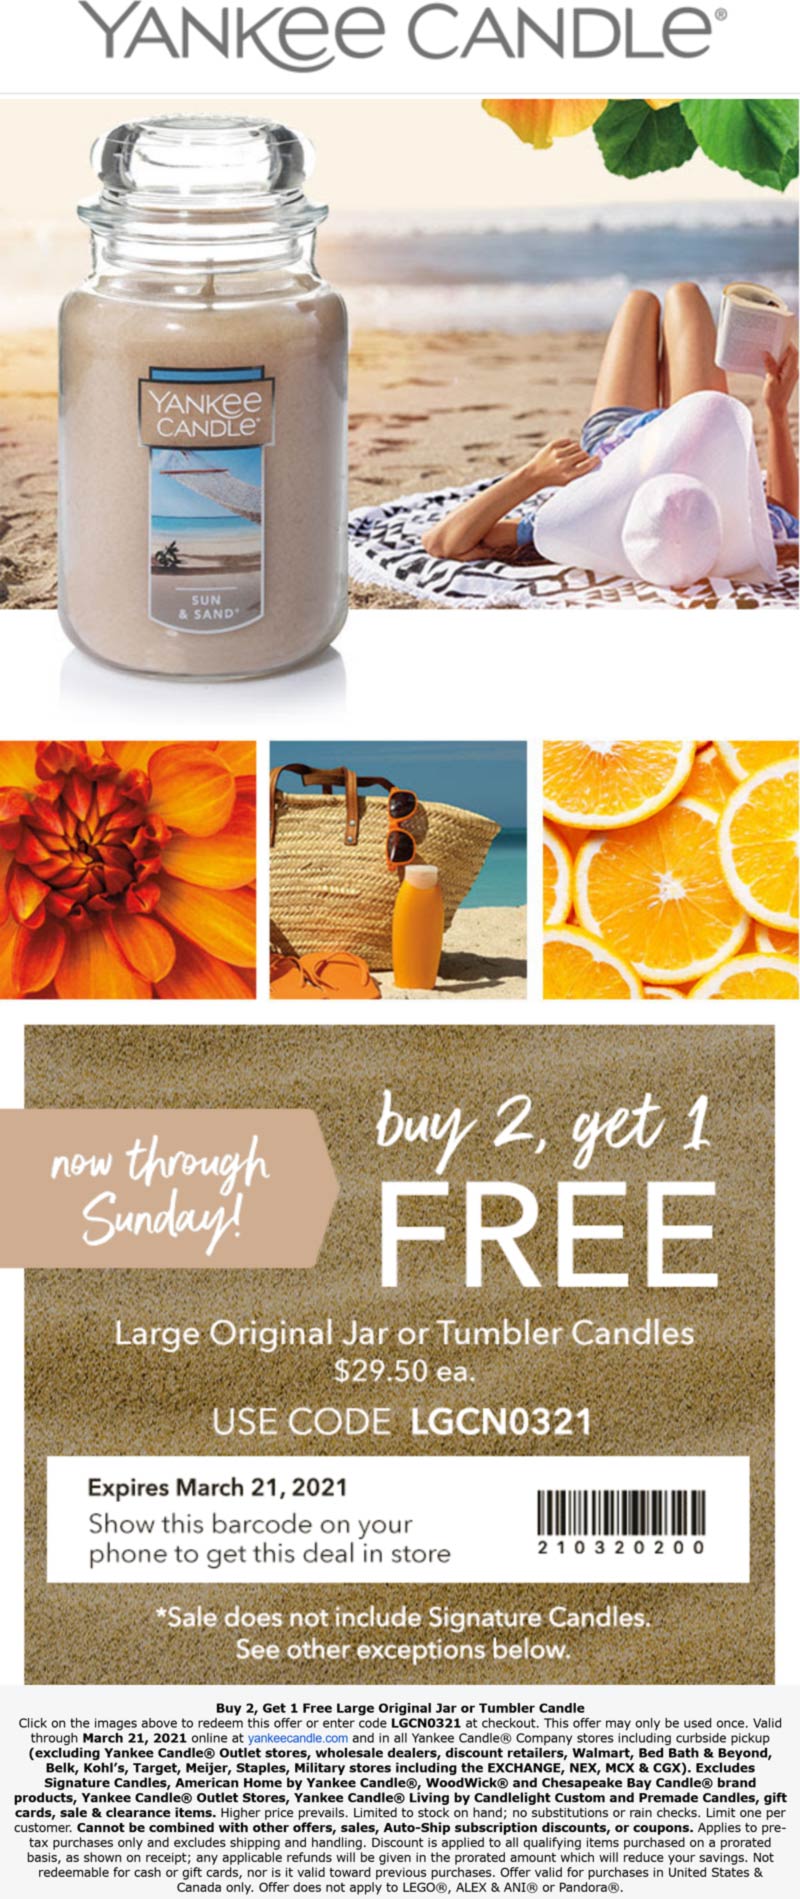 3rd large candle free at Yankee Candle, or online via promo code